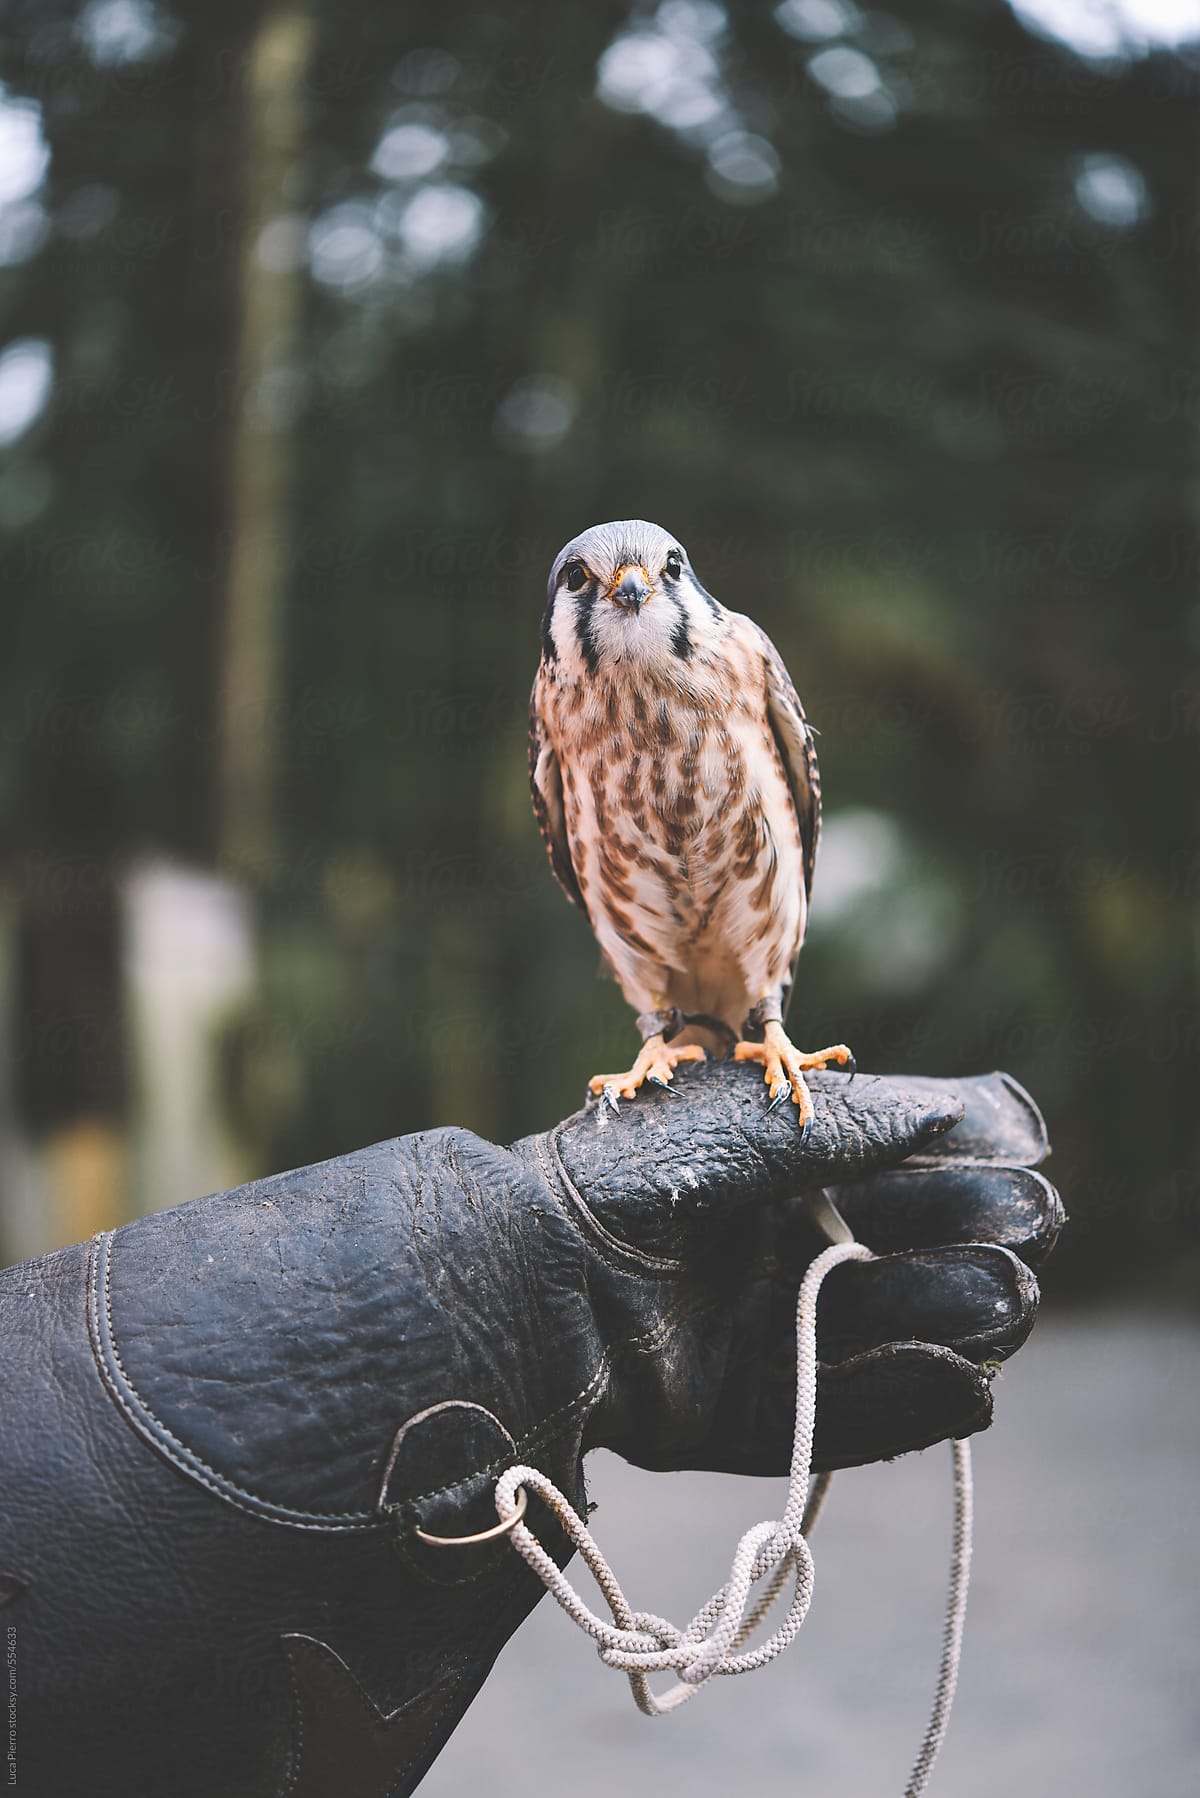 North American Kestrel used for falconry